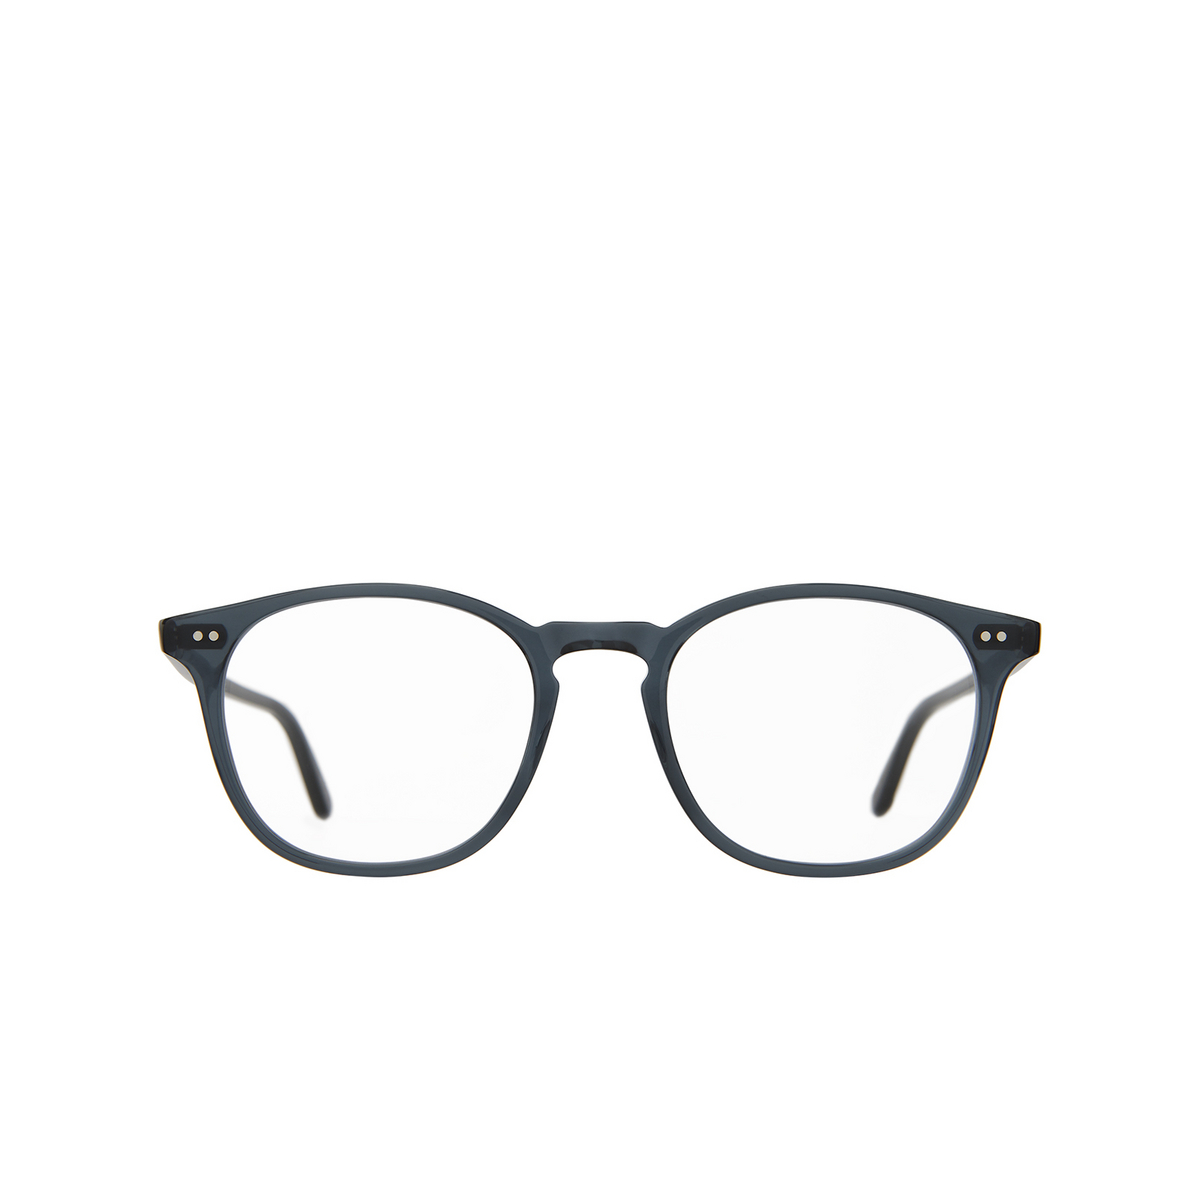 Garrett Leight JUSTICE Eyeglasses NVY Navy - front view